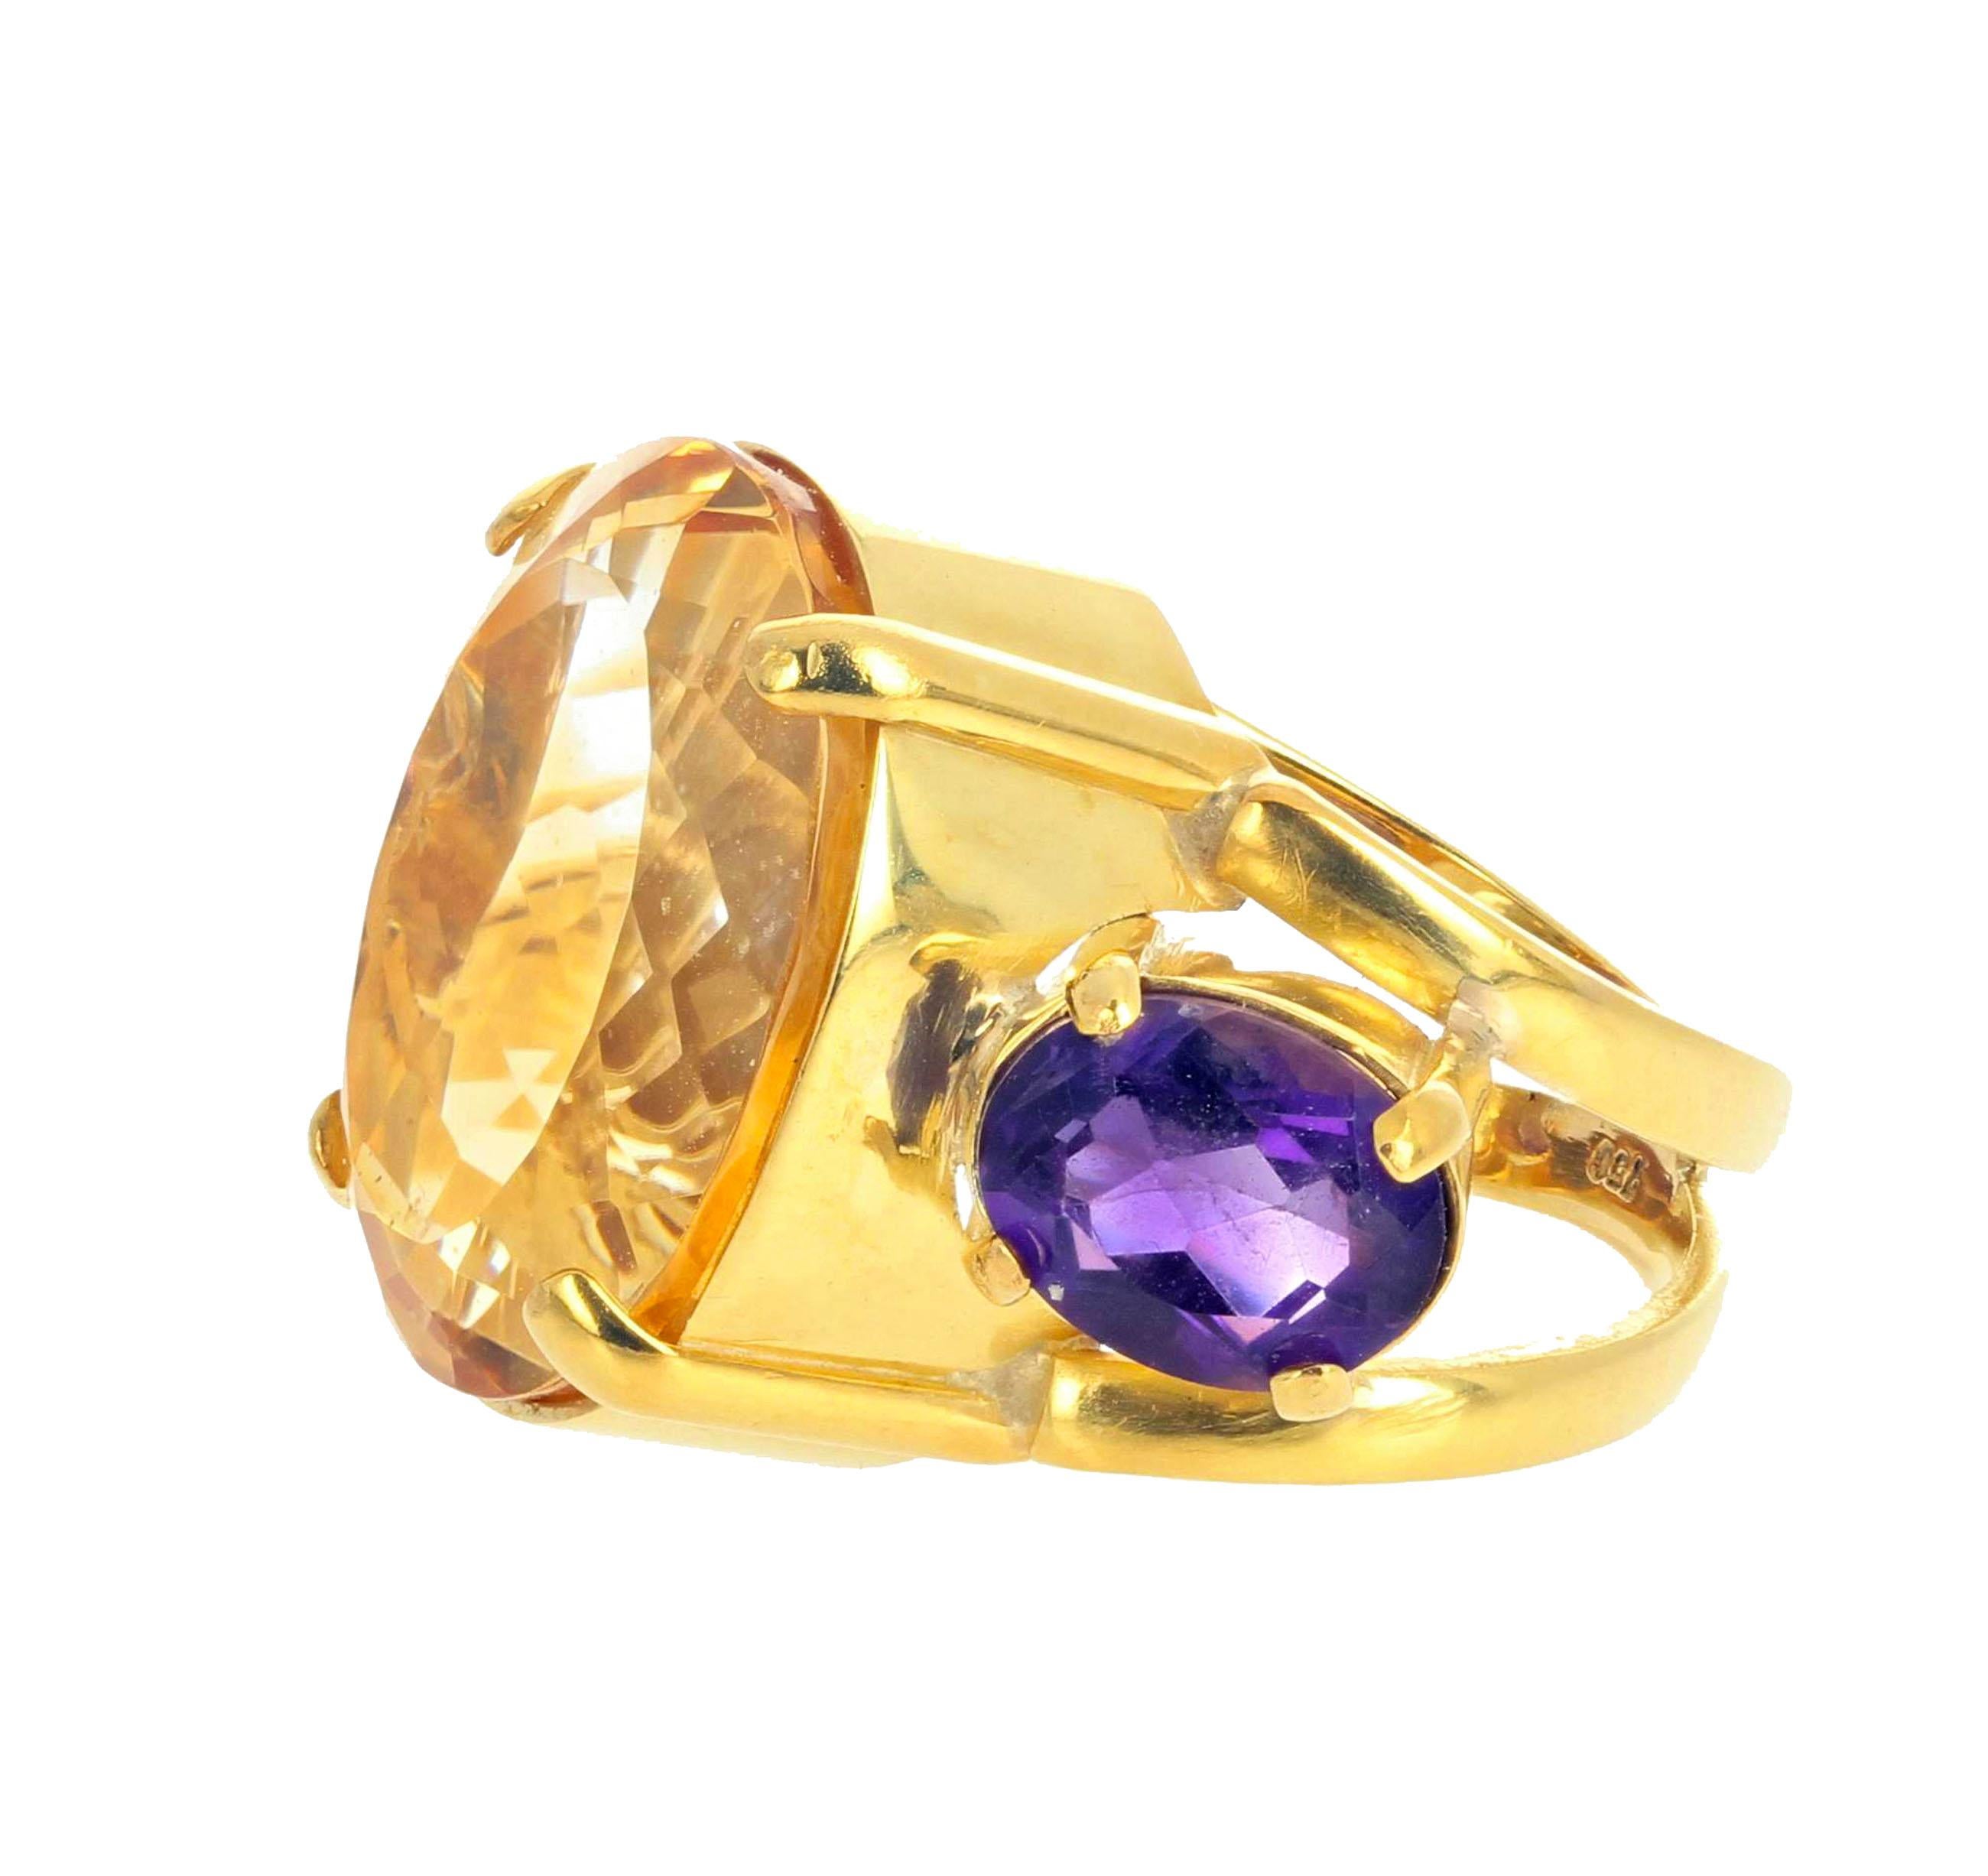 AJD Gloriously Beautiful 26Ct Citrine & Amethyst Impressive 18K Yellow Gold Ring In New Condition For Sale In Raleigh, NC